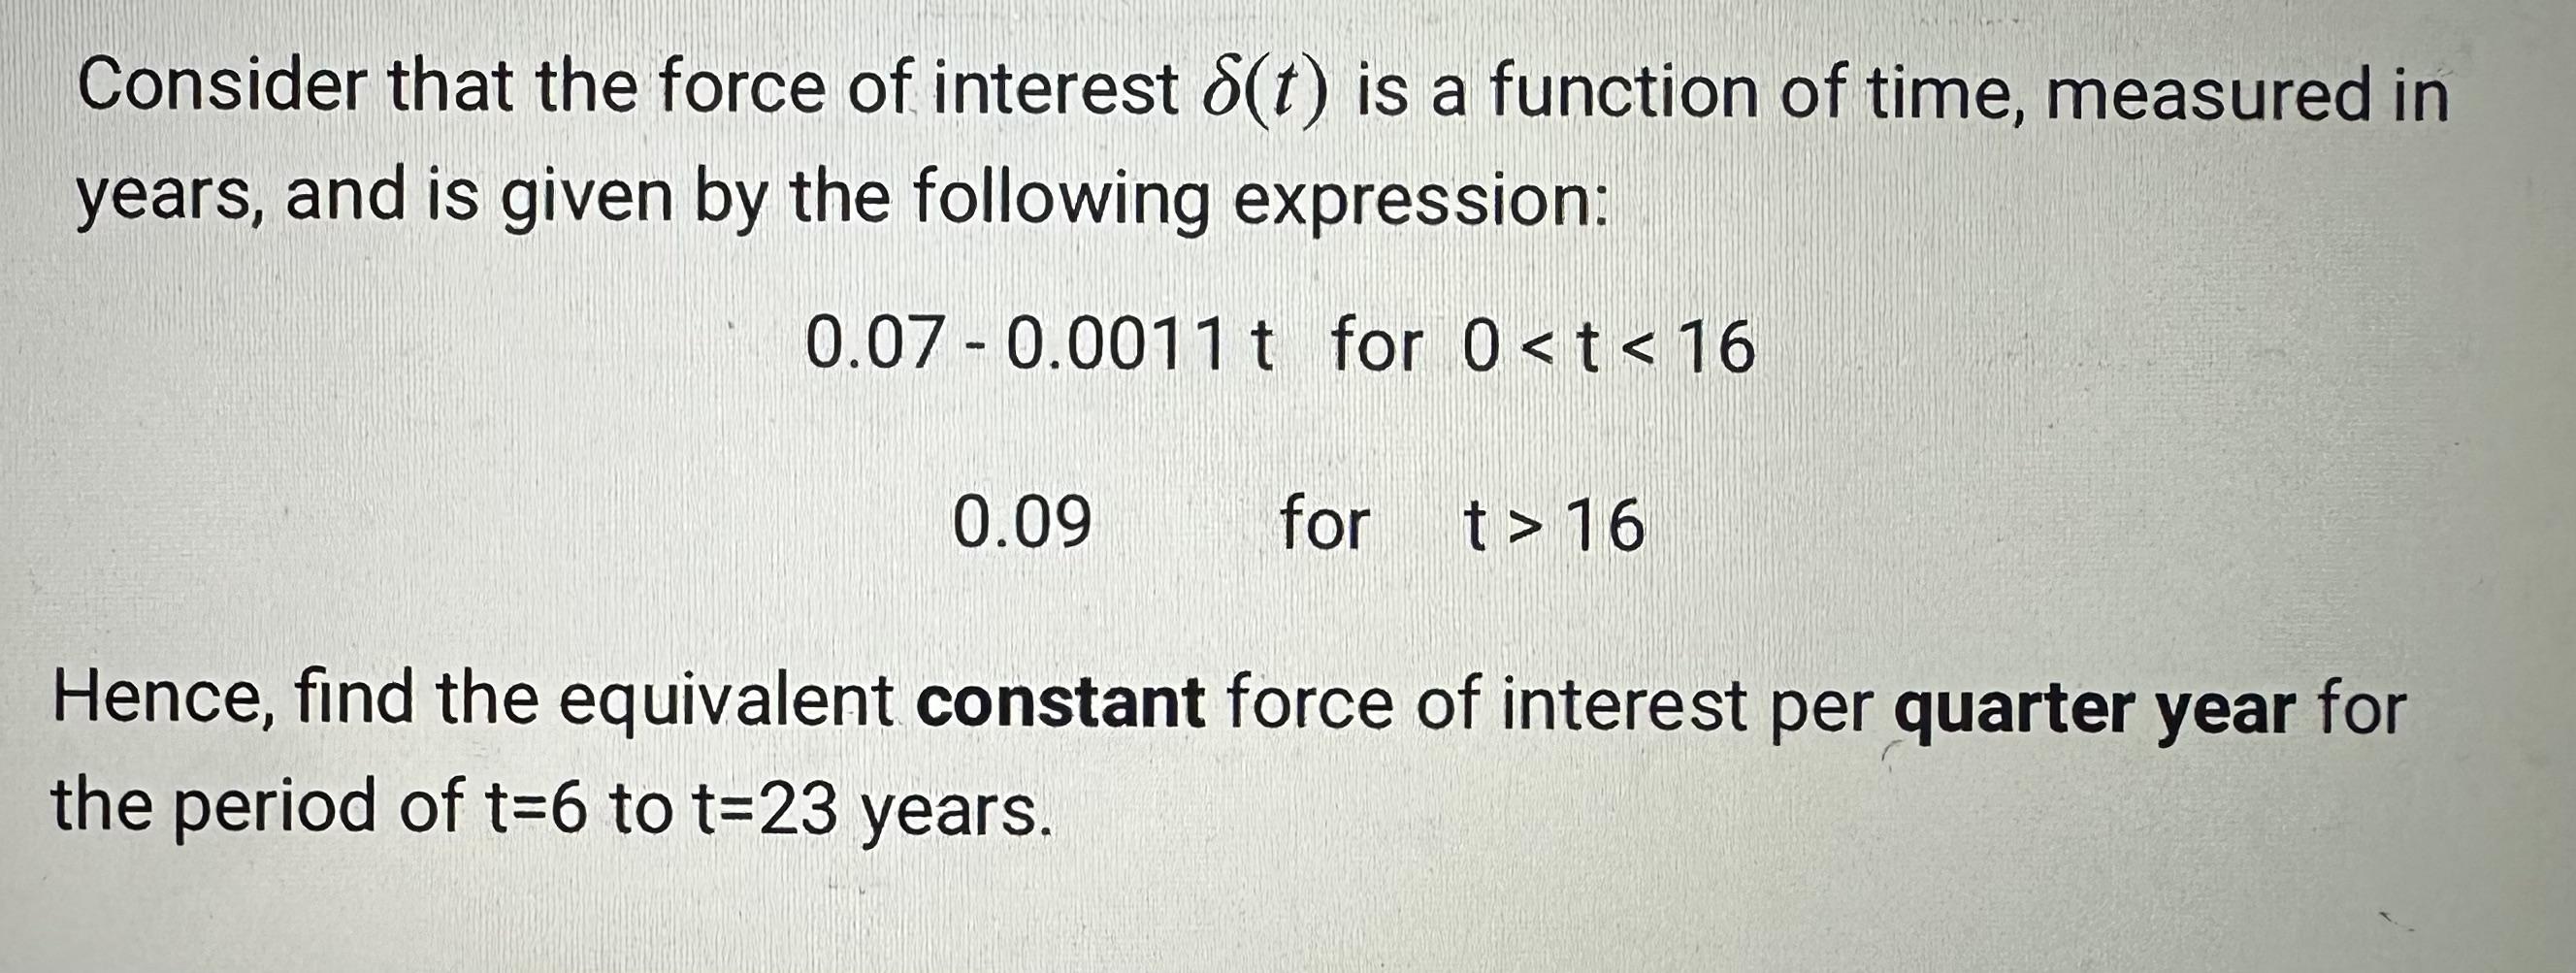 Consider that the force of interest 8(t) is a function of time, measured in years, and is given by the